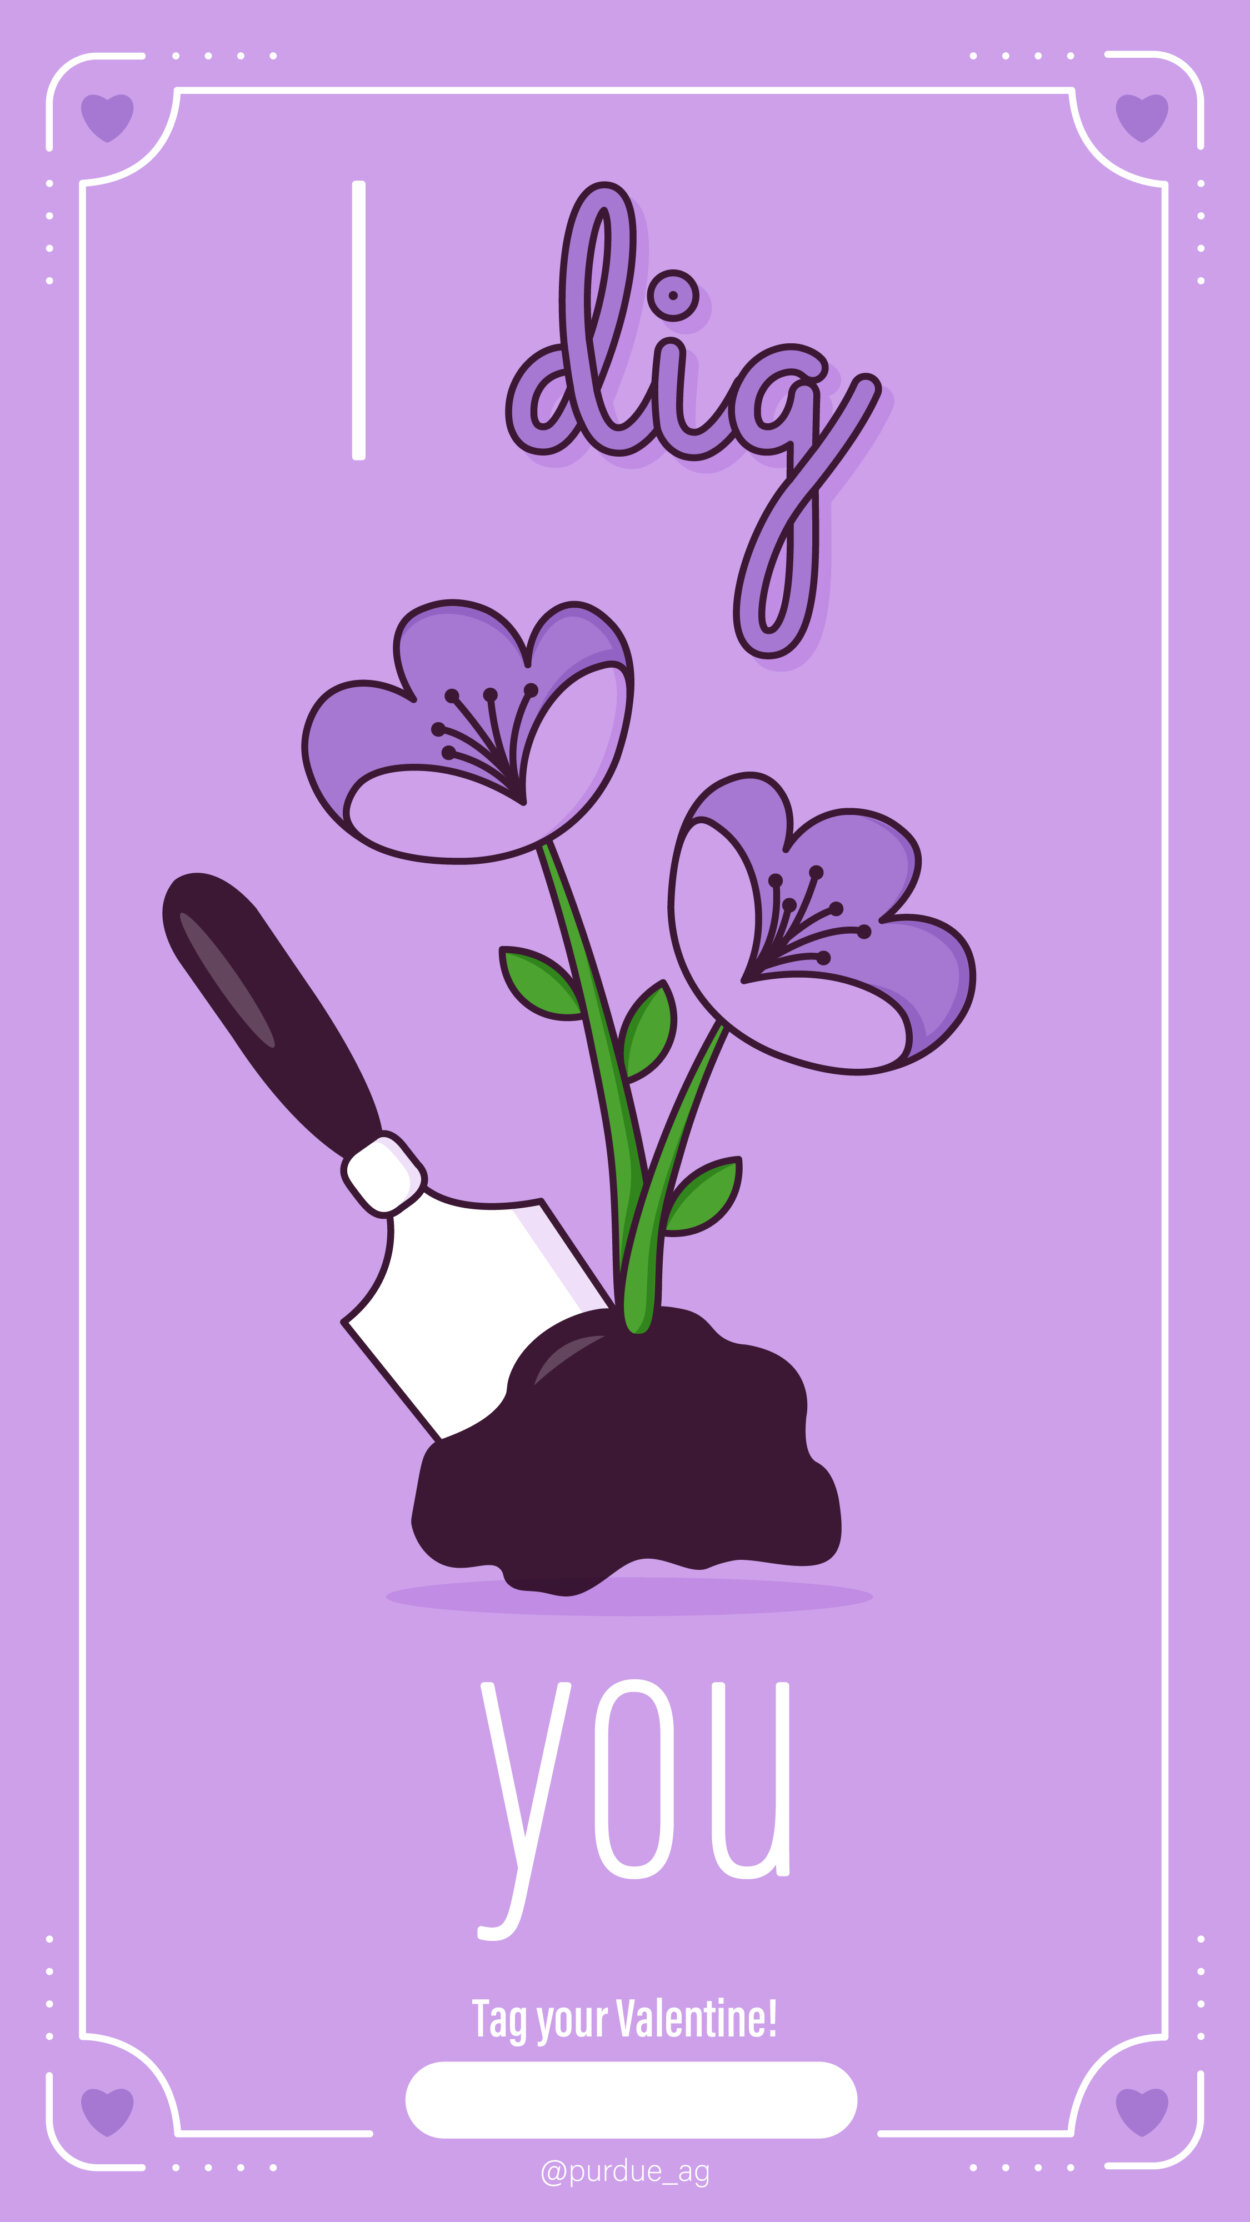 Cartoon drawing of a plant with purple flowers